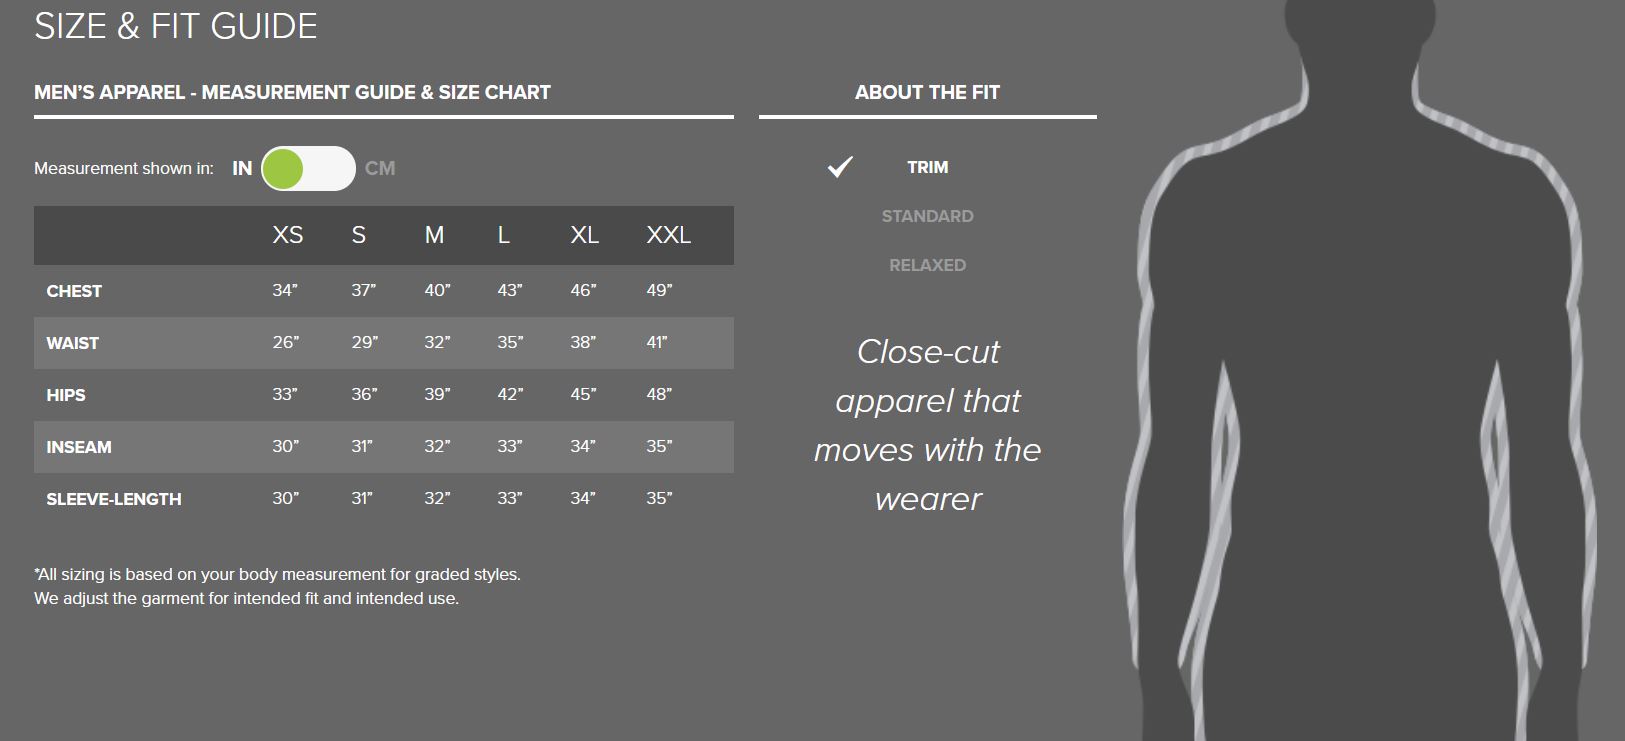 Outdoor Research men's apparel sizing chart